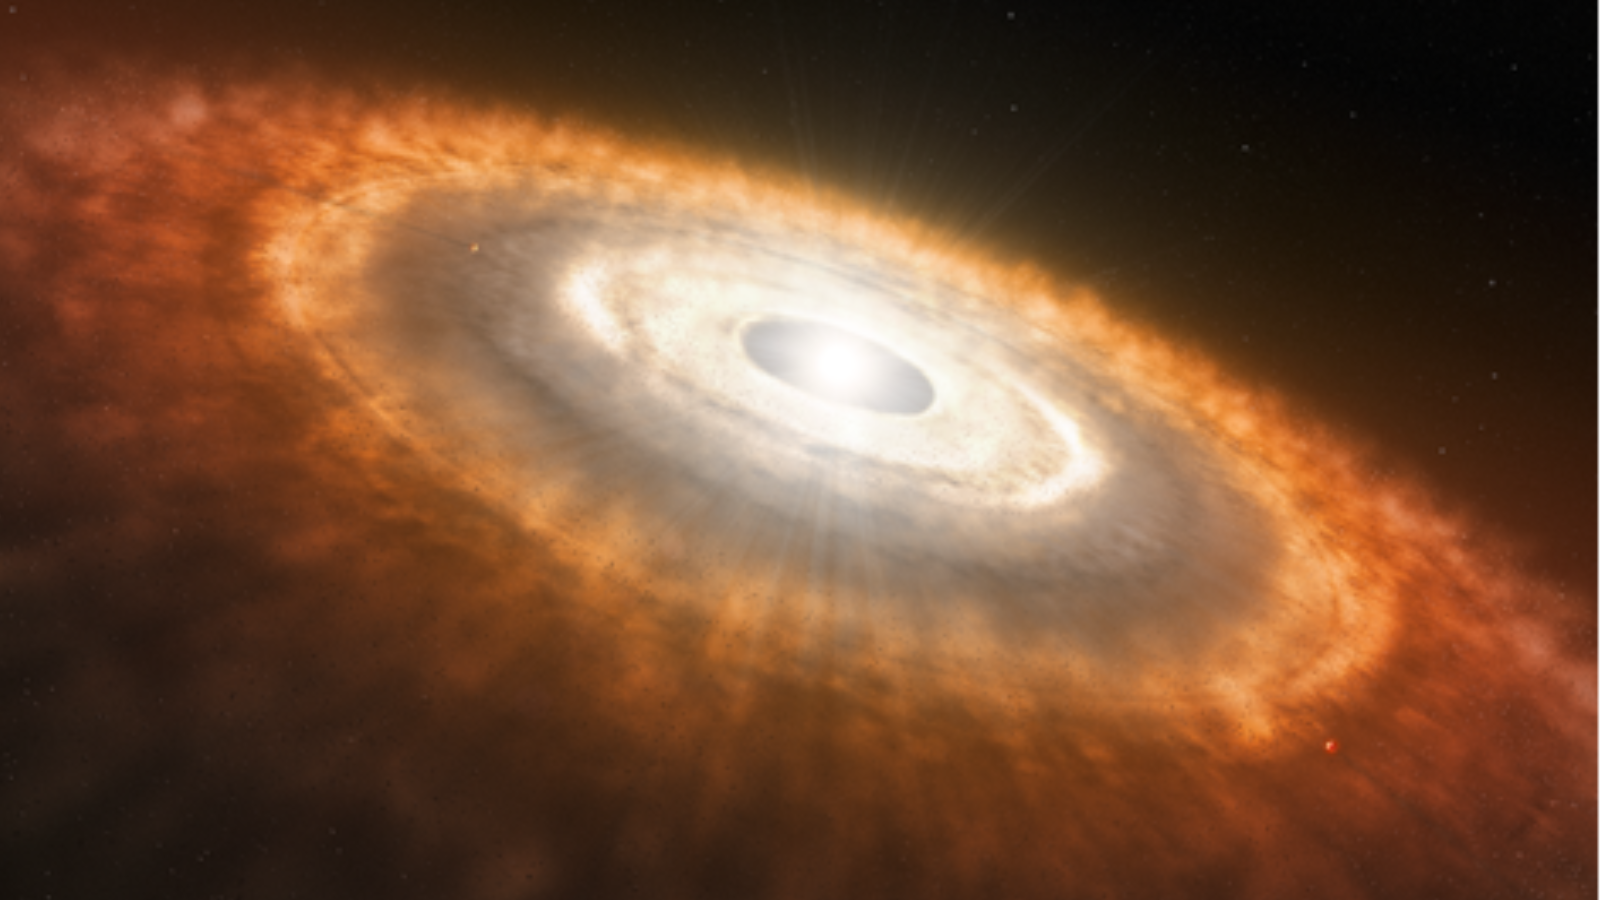 Illustration of a bright white star surrounded by a massive halo of reddish gas, dust, and other objects.